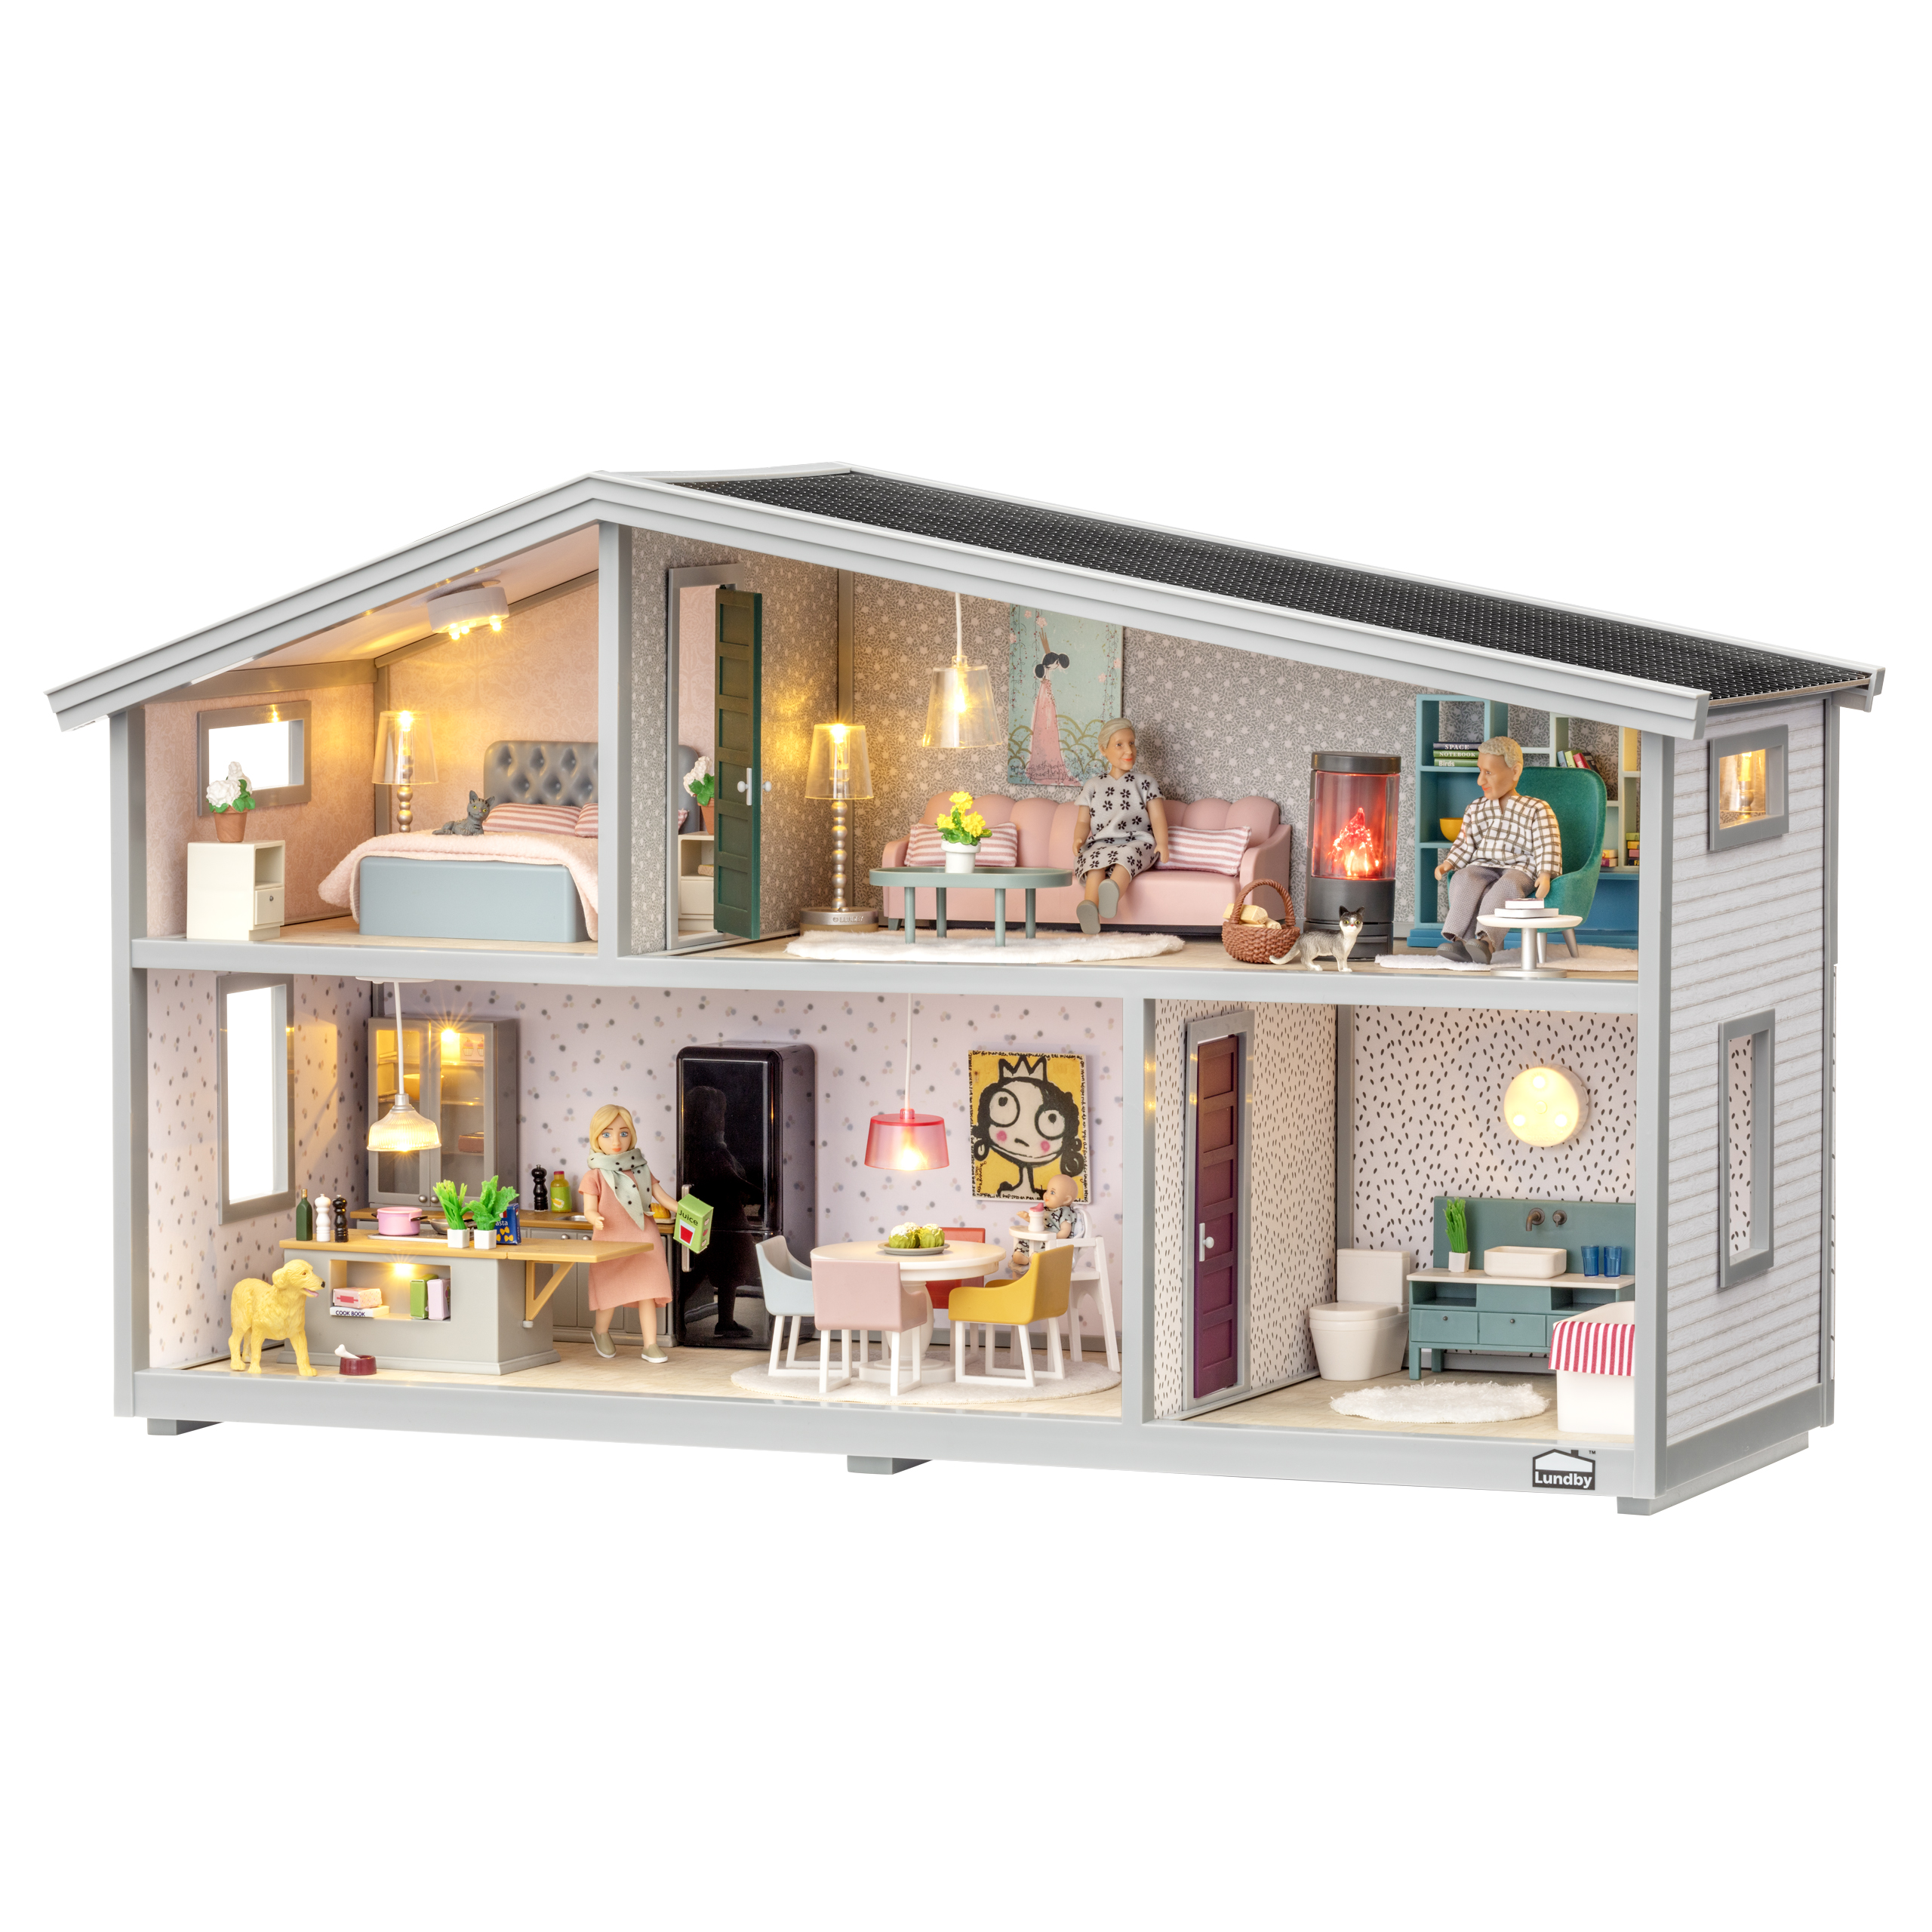 Lundby lundby doll house 4 rooms